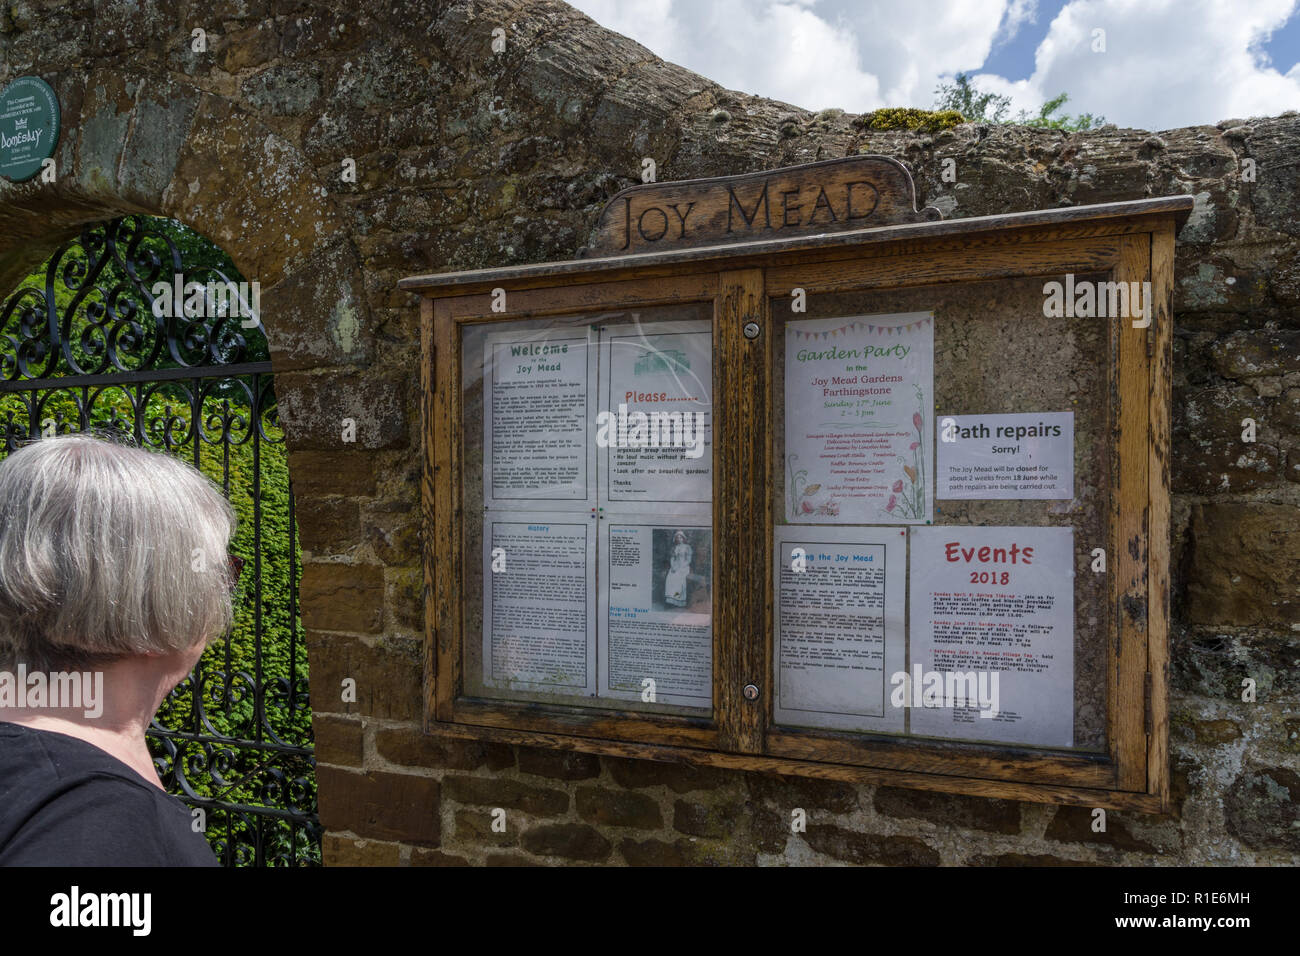 Senior woman reading the information board for Joy Mead Gardens in the village of Farthingstone, Northamptonshire, UK Stock Photo